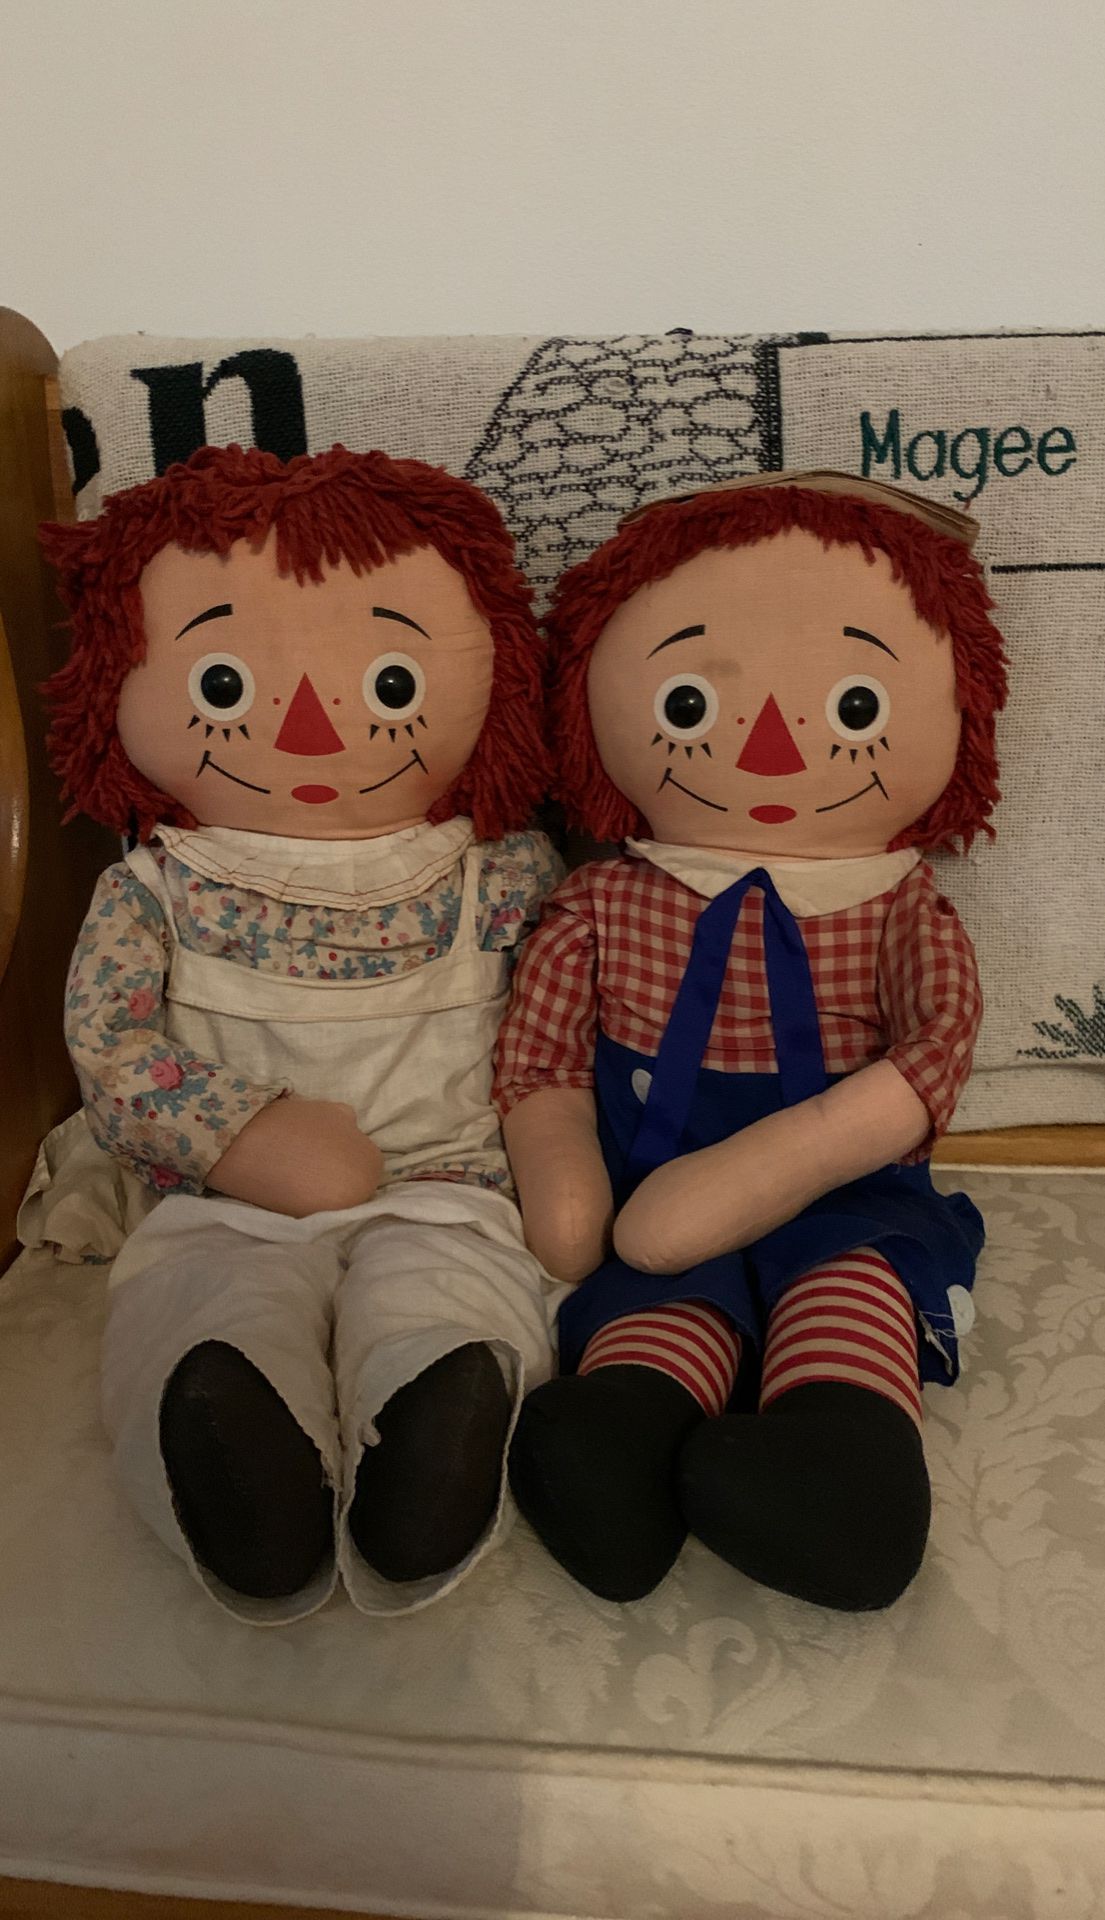 Vintage Raggedy Ann and Andy